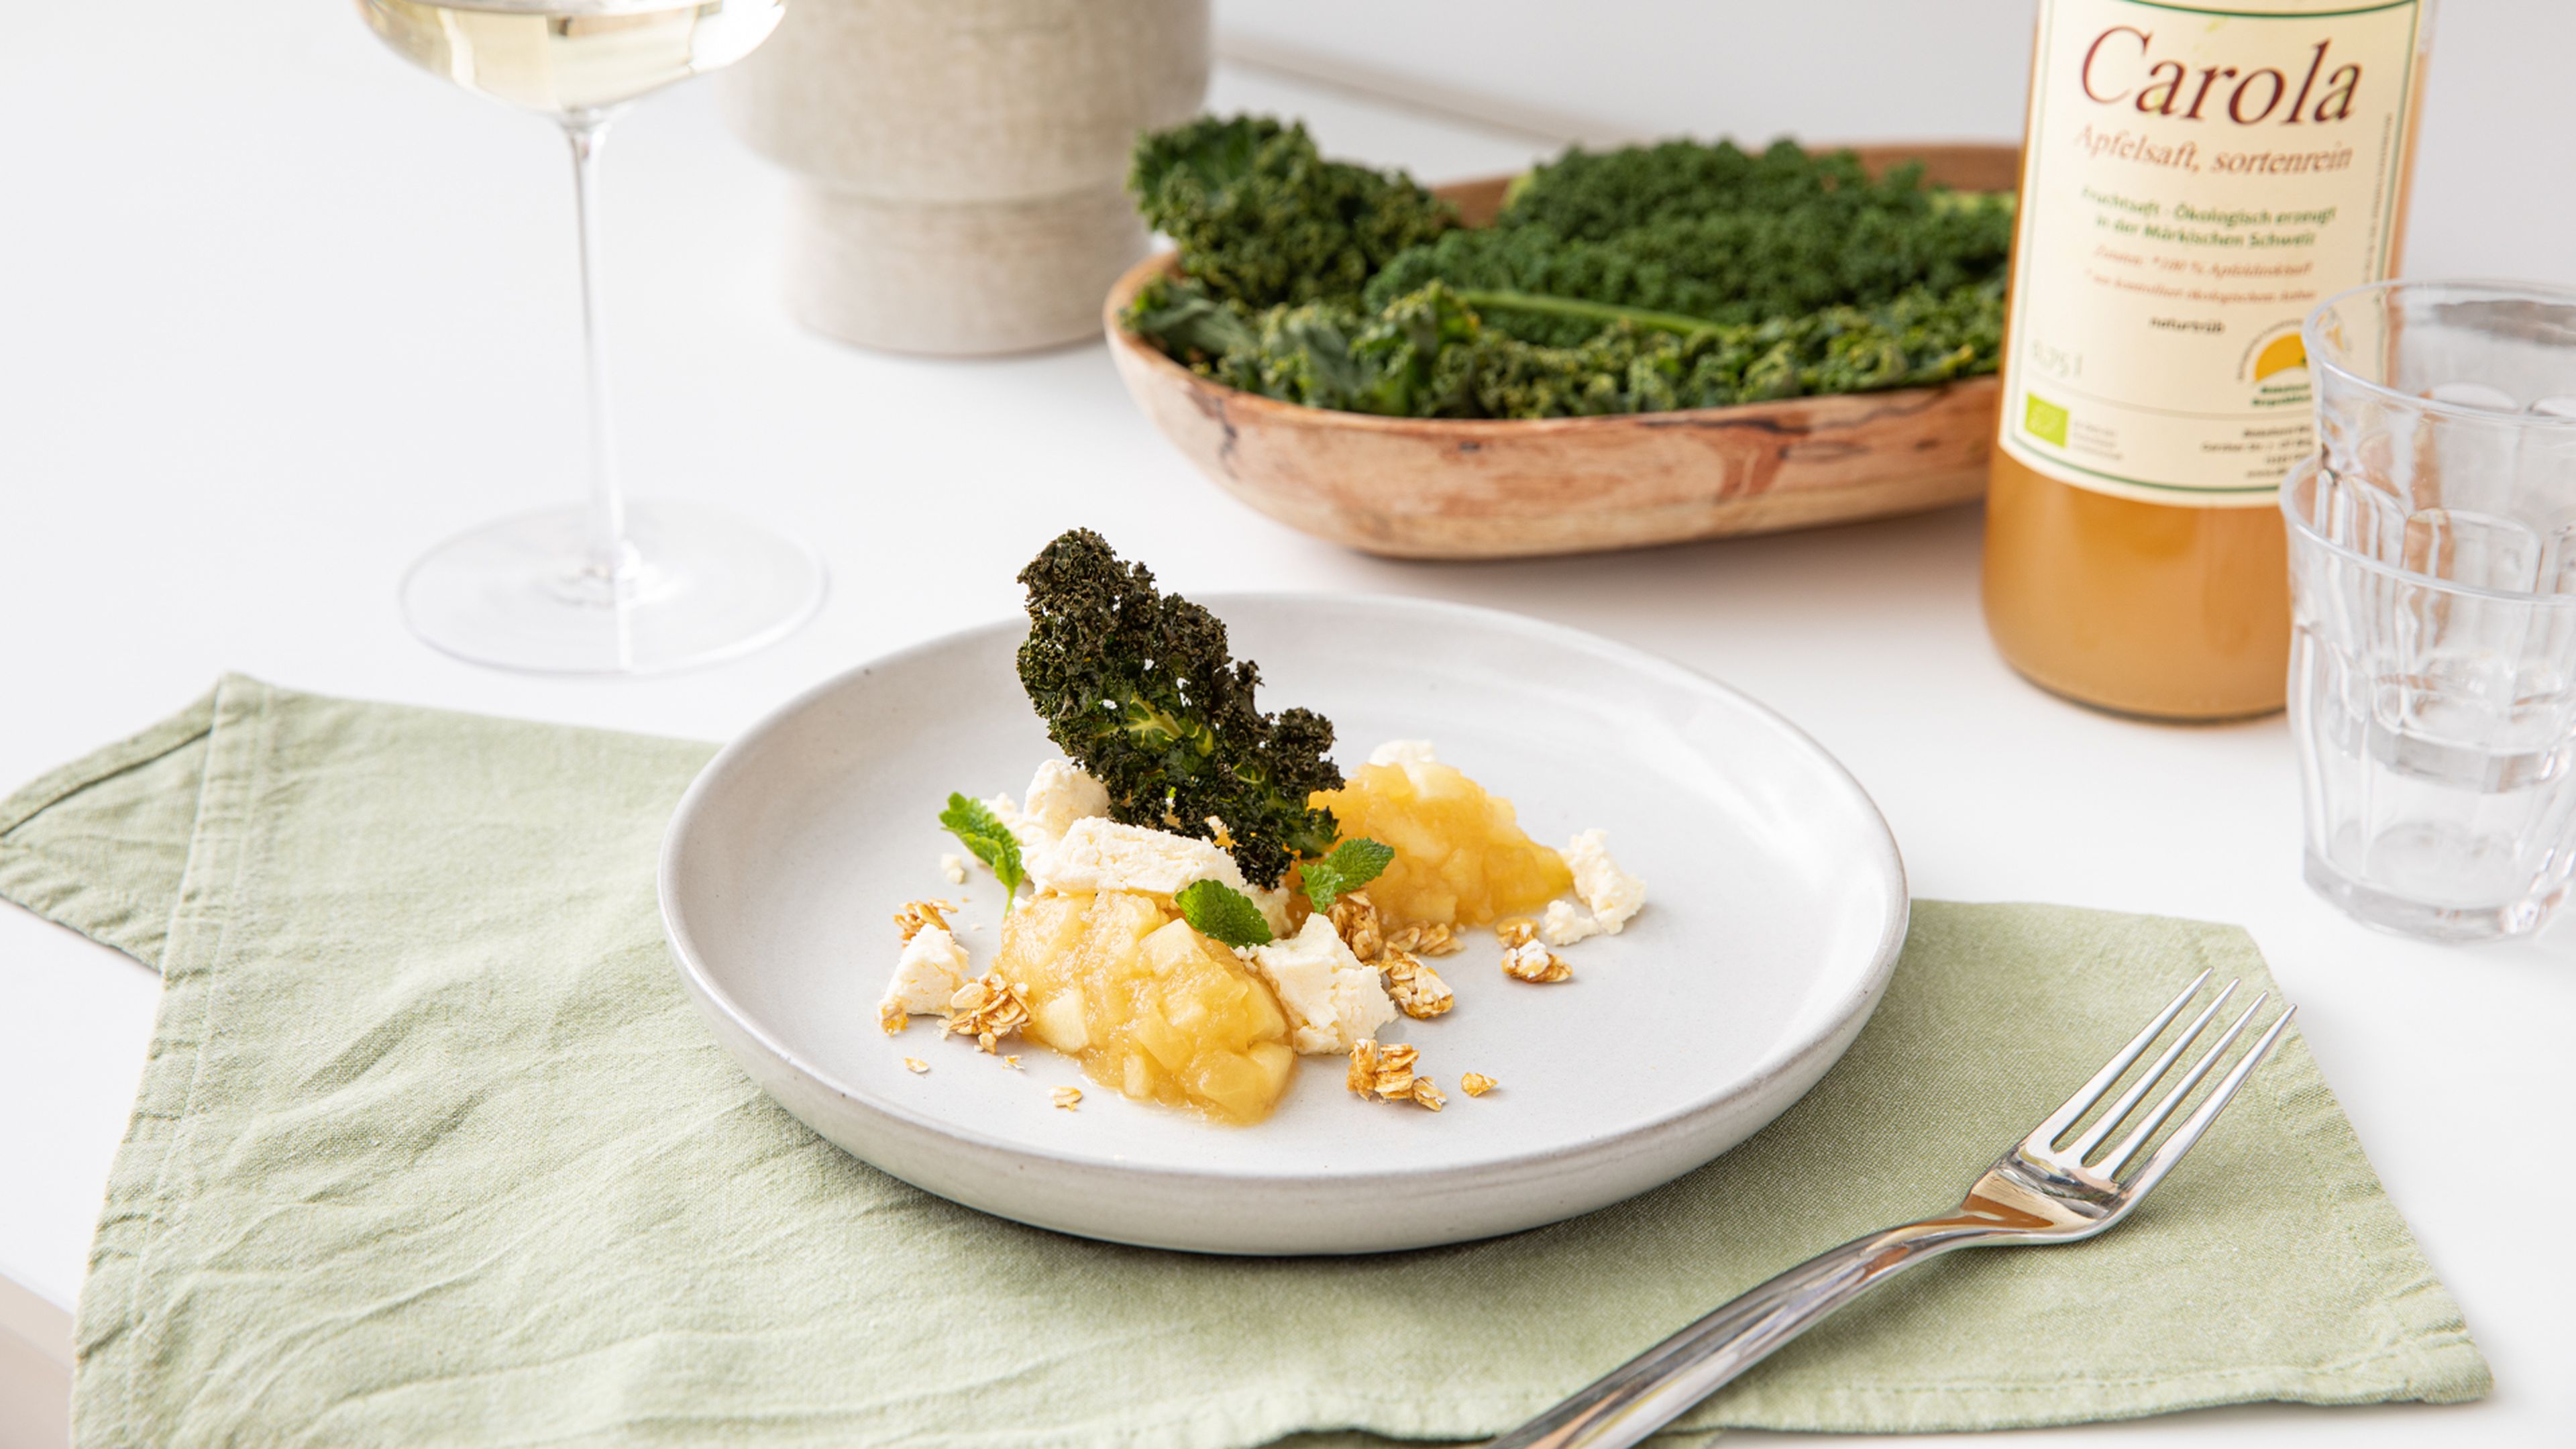 Apple compote with oatmeal crunch, cream cheese, and kale chips